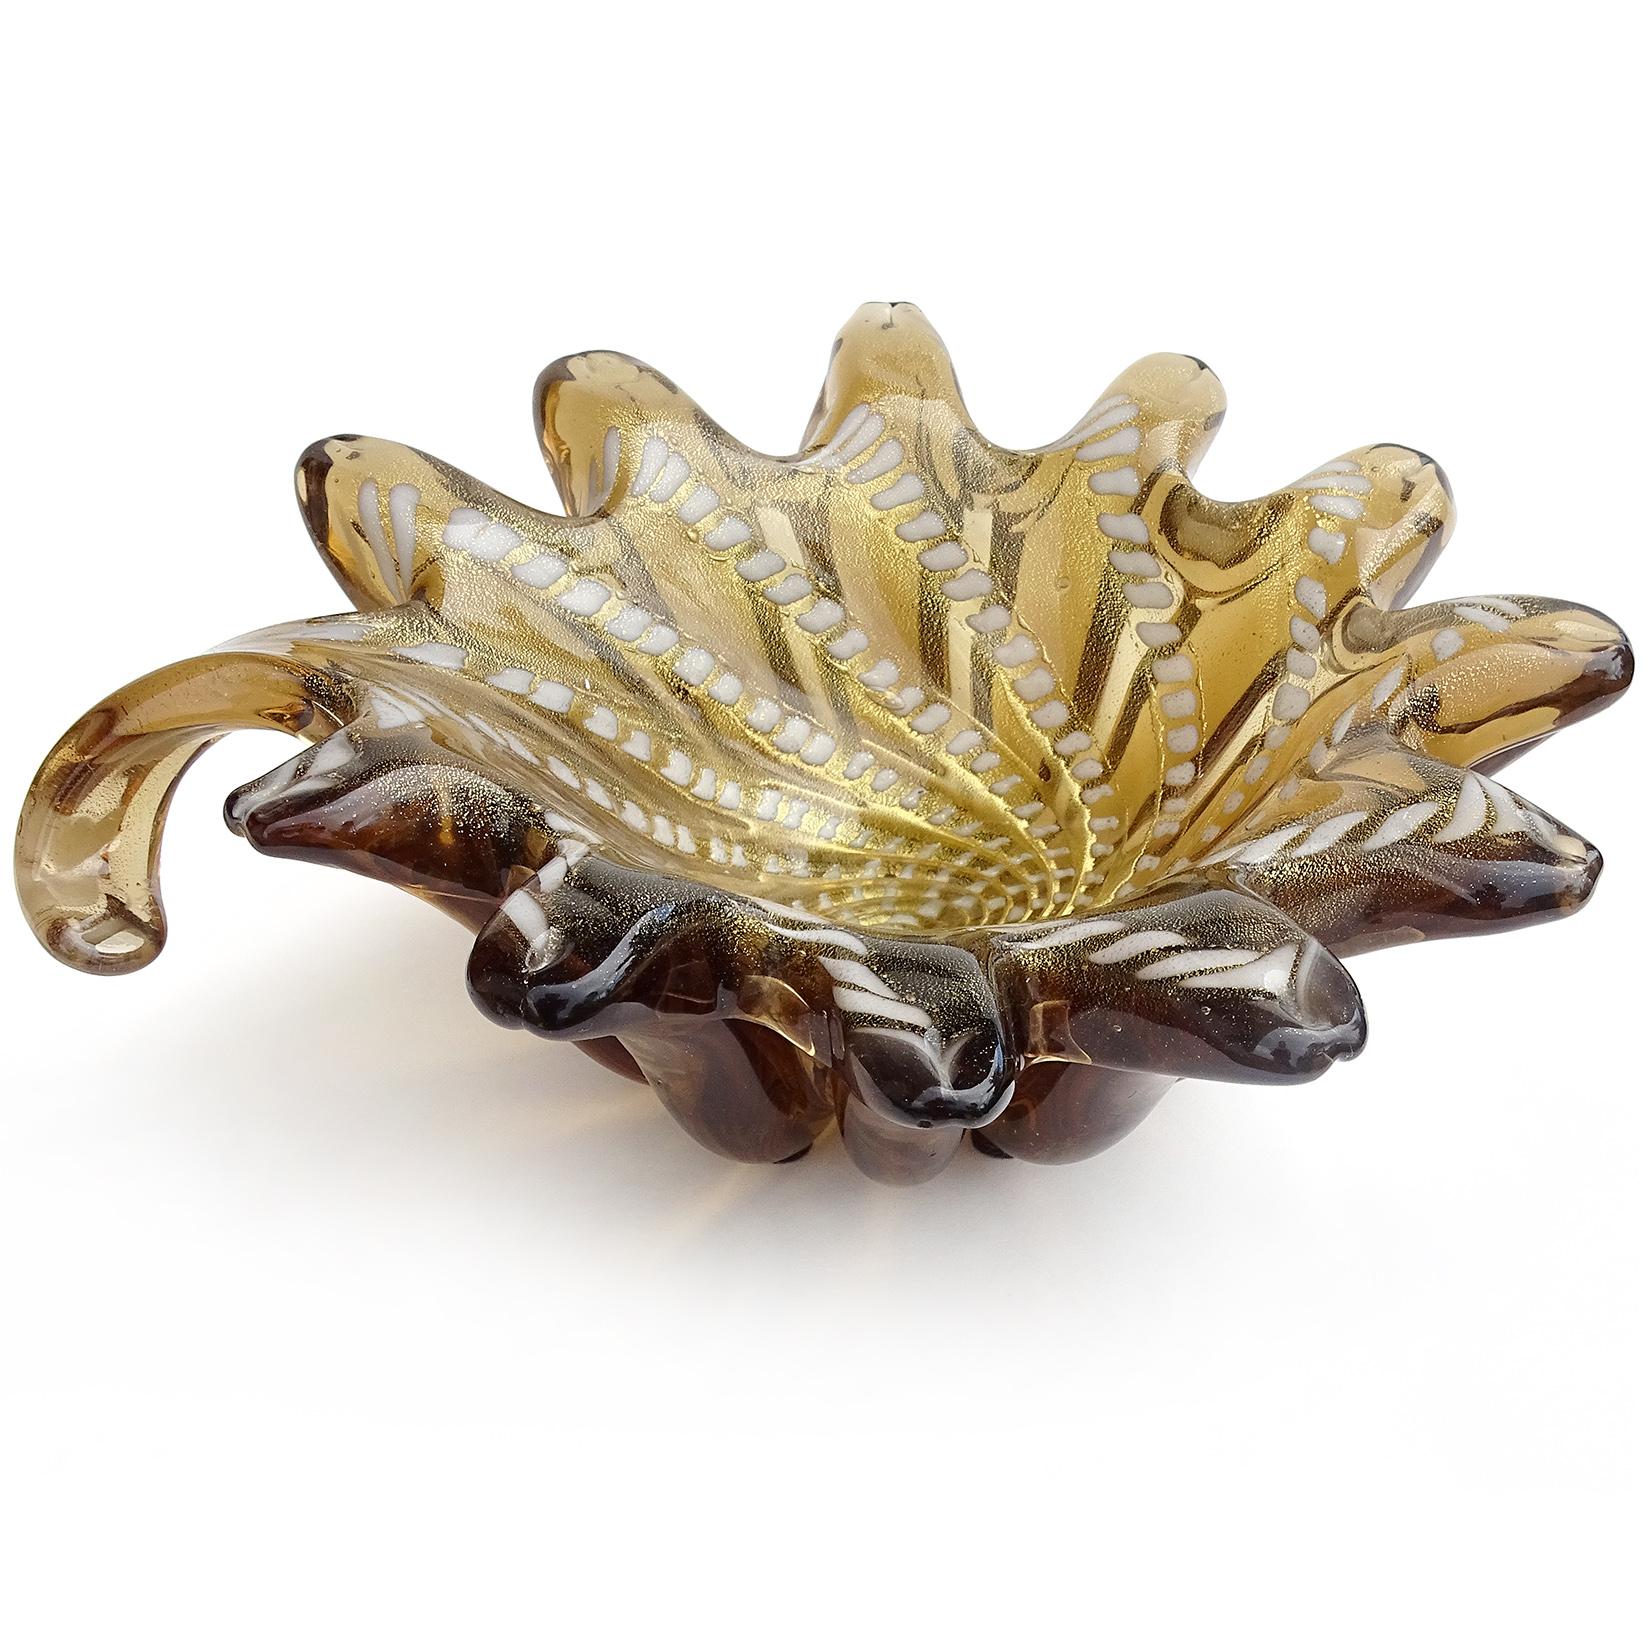 Beautiful and unusual vintage Murano hand blown dark amber, gold flecks, and swirling design Italian art glass bowl. Decorated with white color spots spiraling towards the center. It has 11 pulled pieces along the edge, and a curled tail handle. The